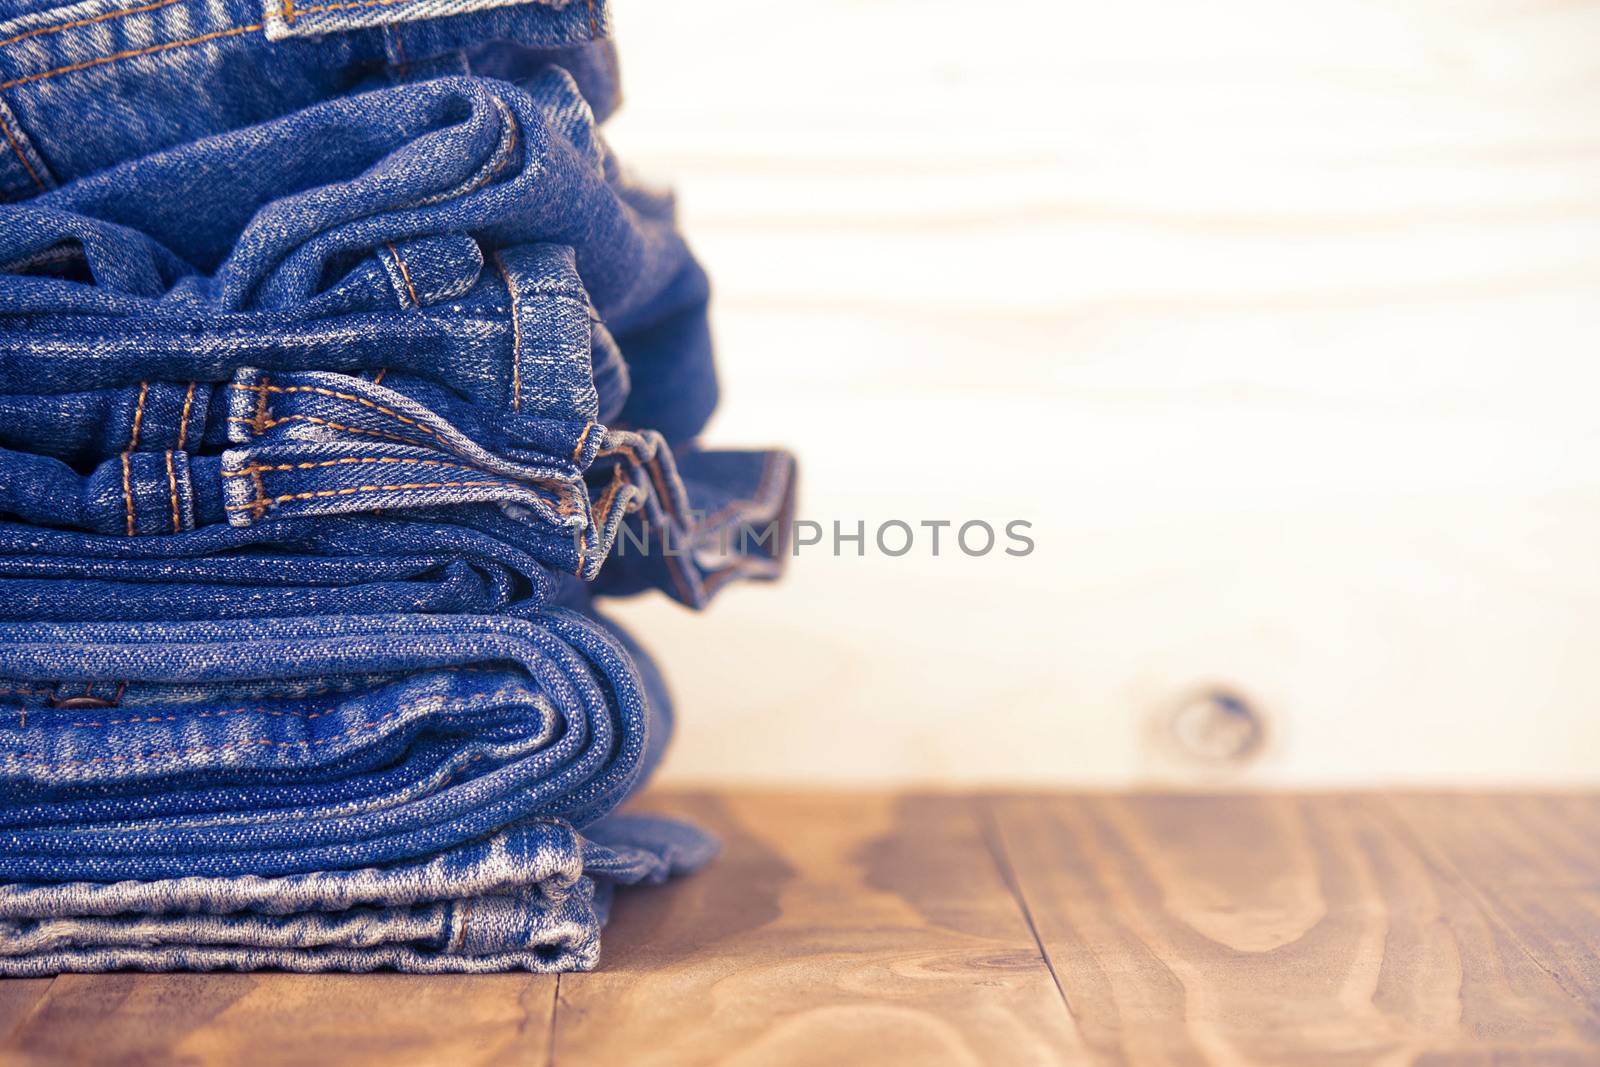 Stack Of Jeans On Old Wood Flooring, Fashion Concept  by rakoptonLPN